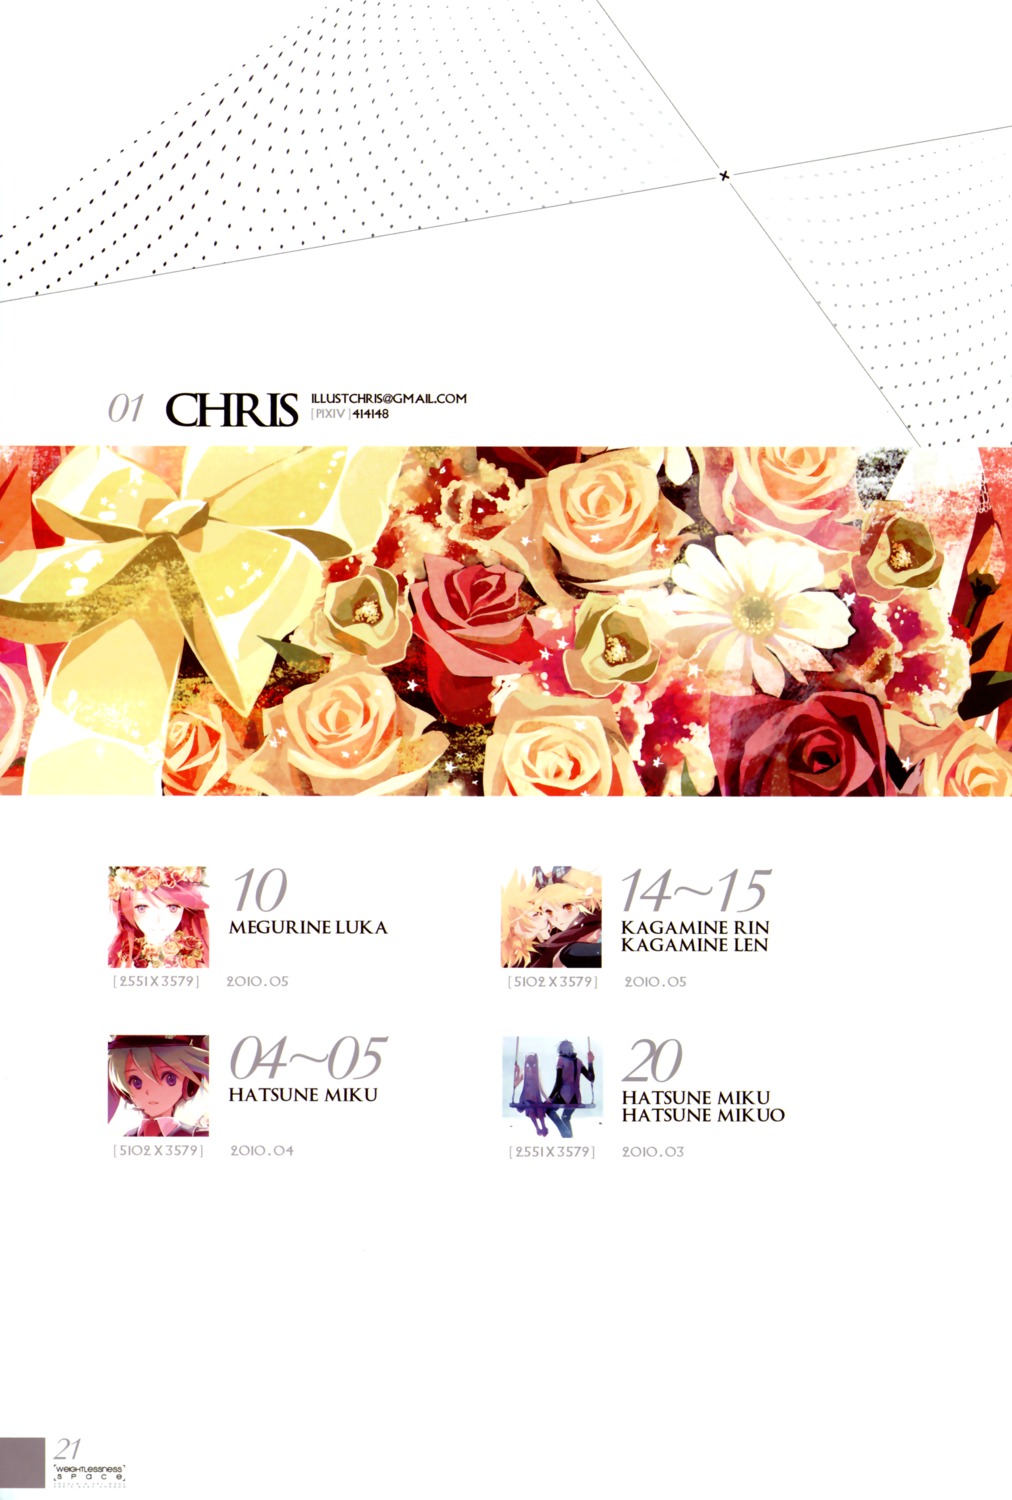 chris index_page